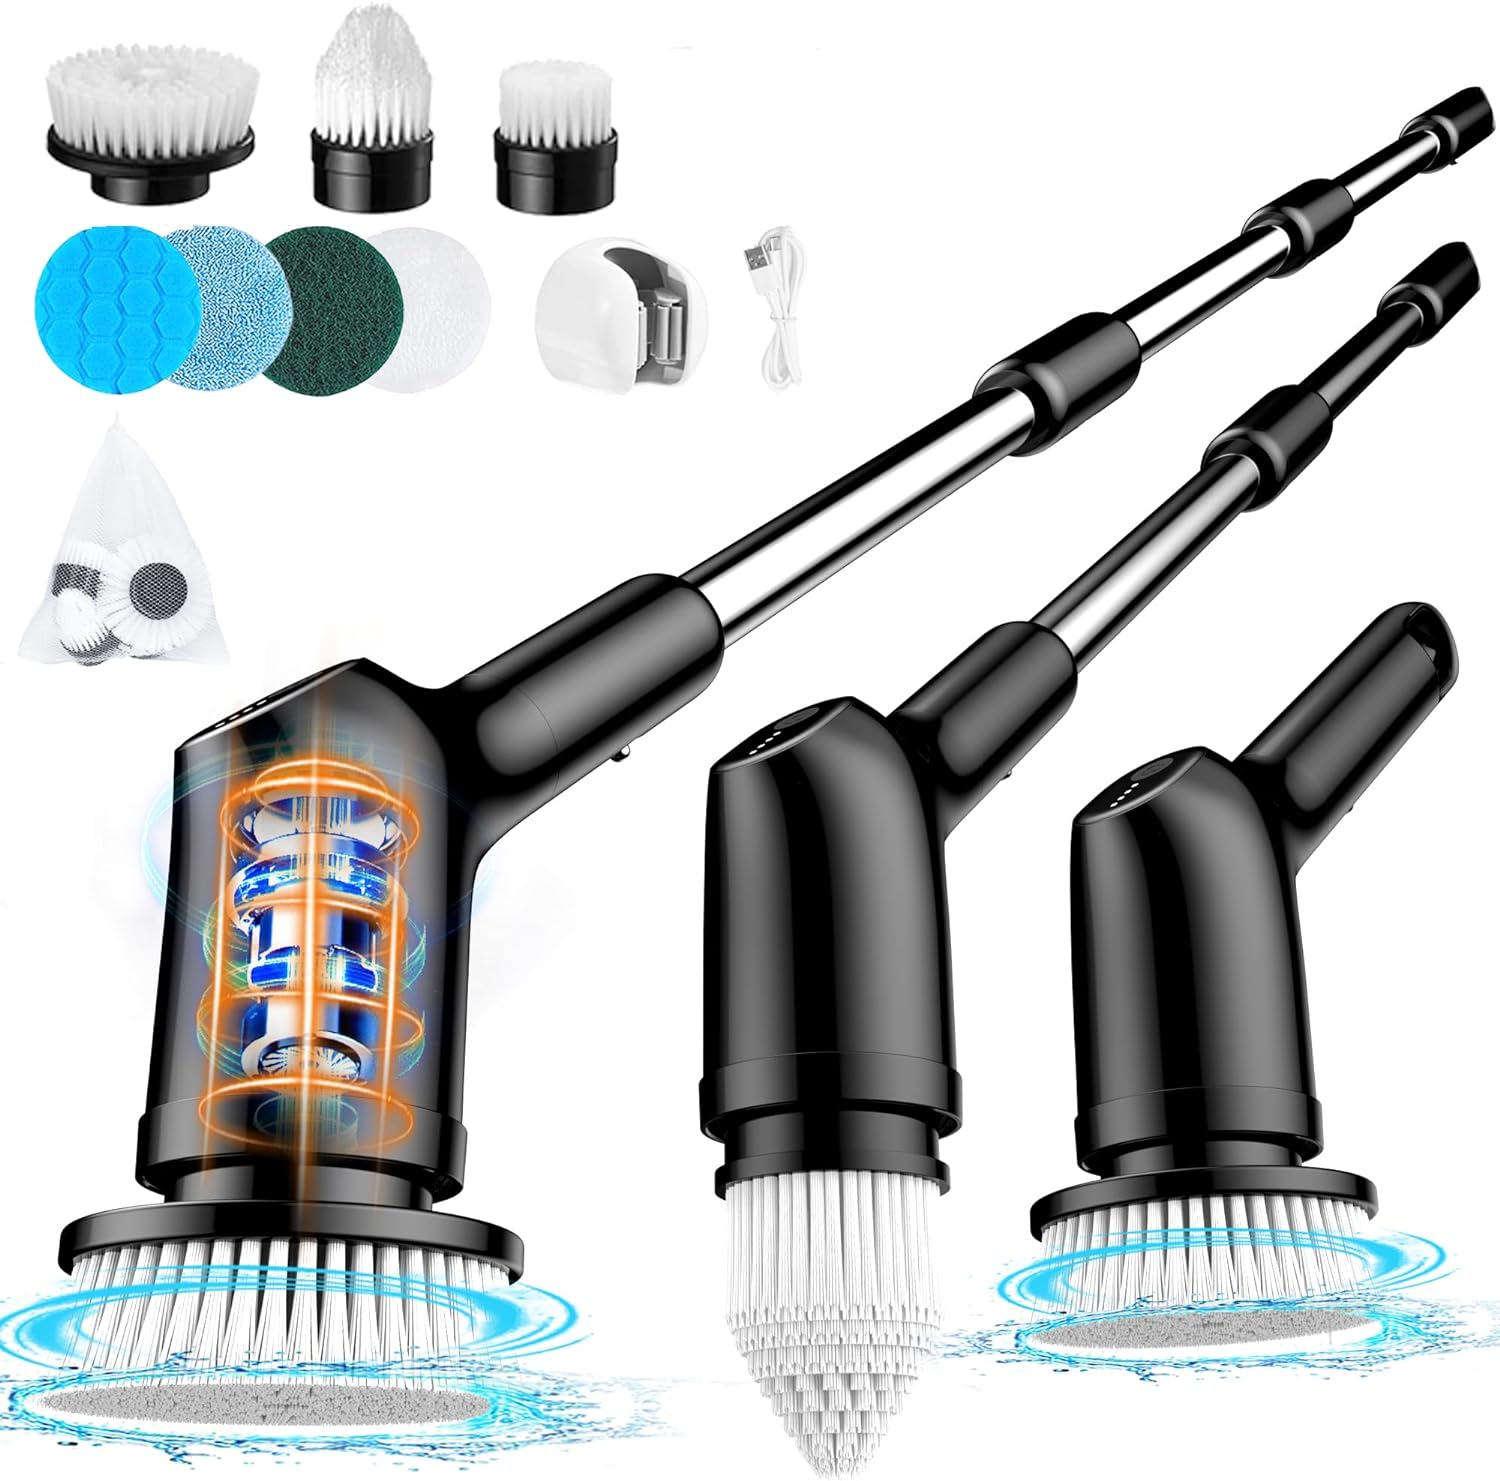 Electric Spin Scrubber, Cordless Cleaning Brush with 3 Adjustable Speeds and 9 Replaceable Cleaning Heads, Adjustable Extension Arm and LED Screen Power Shower Scrubber for Bathroom, Tub, Tile, Floor